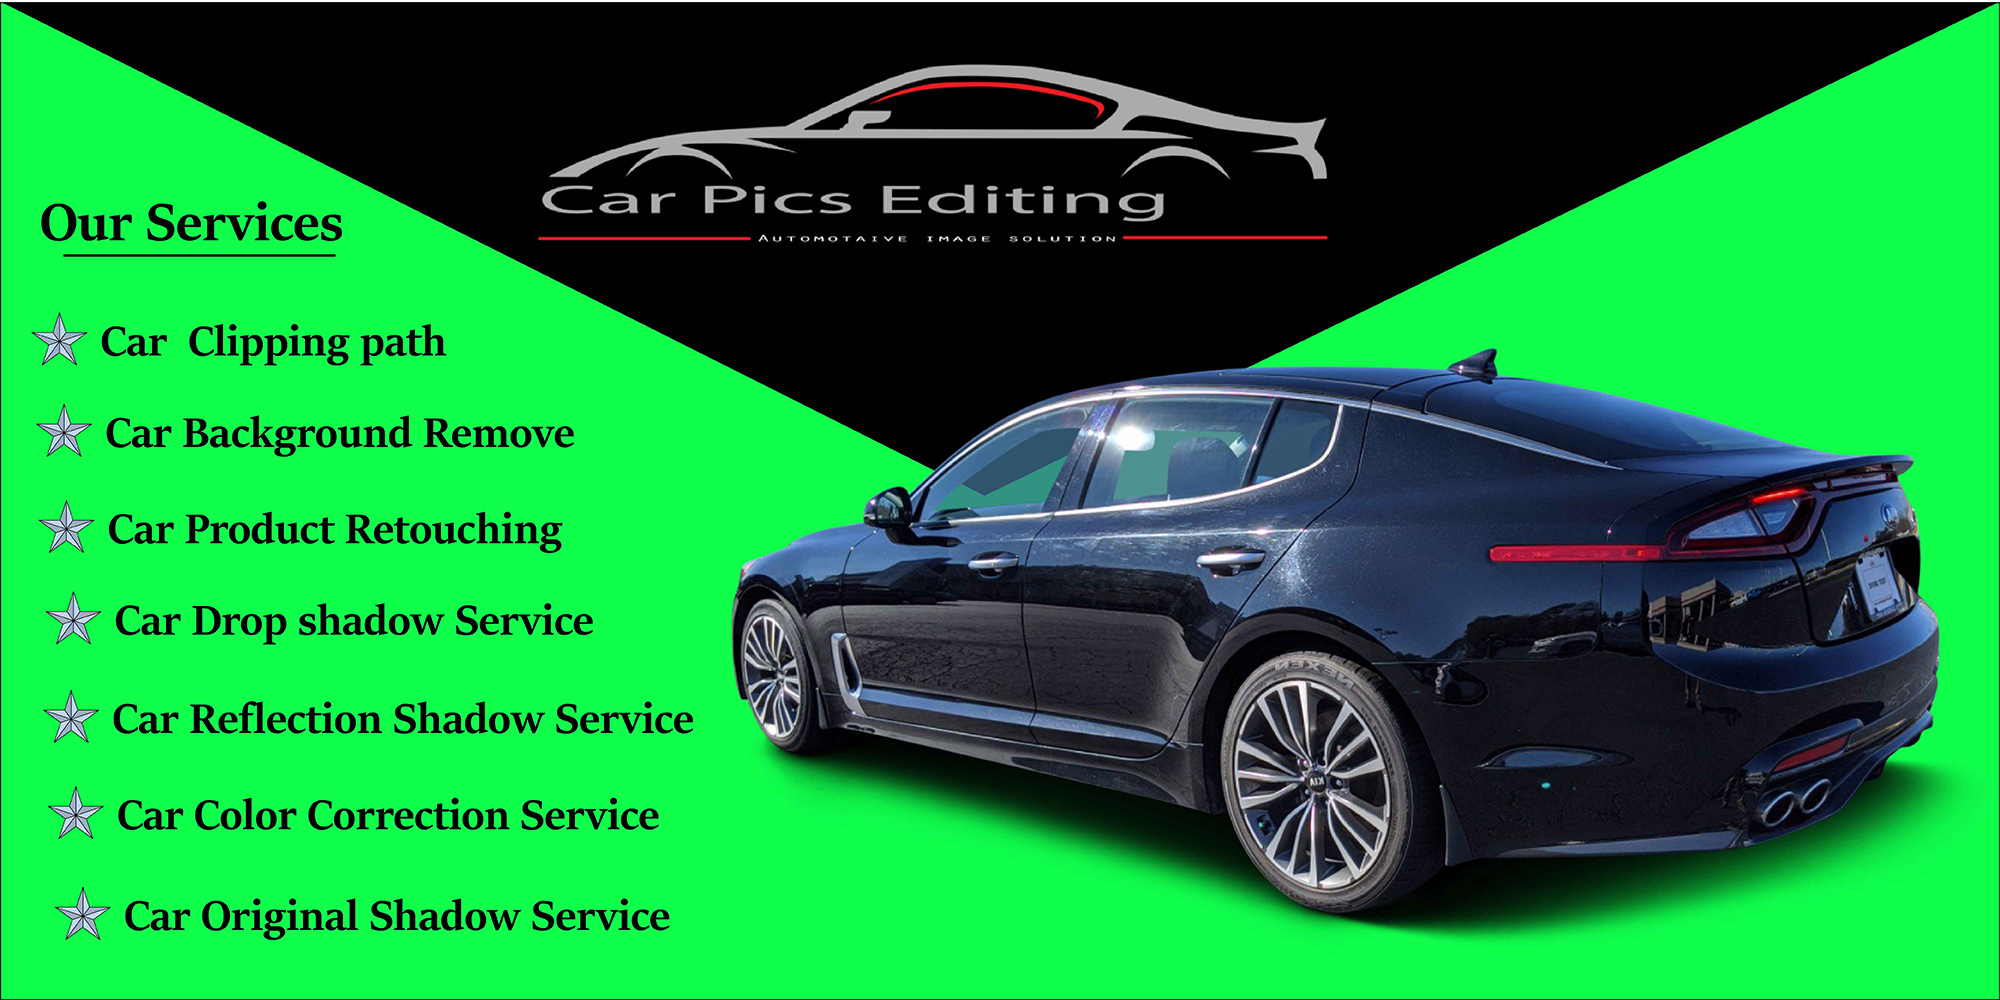 Car Transparent Background Is Bound To Make an Impact In Your Business-Car pics editing 4